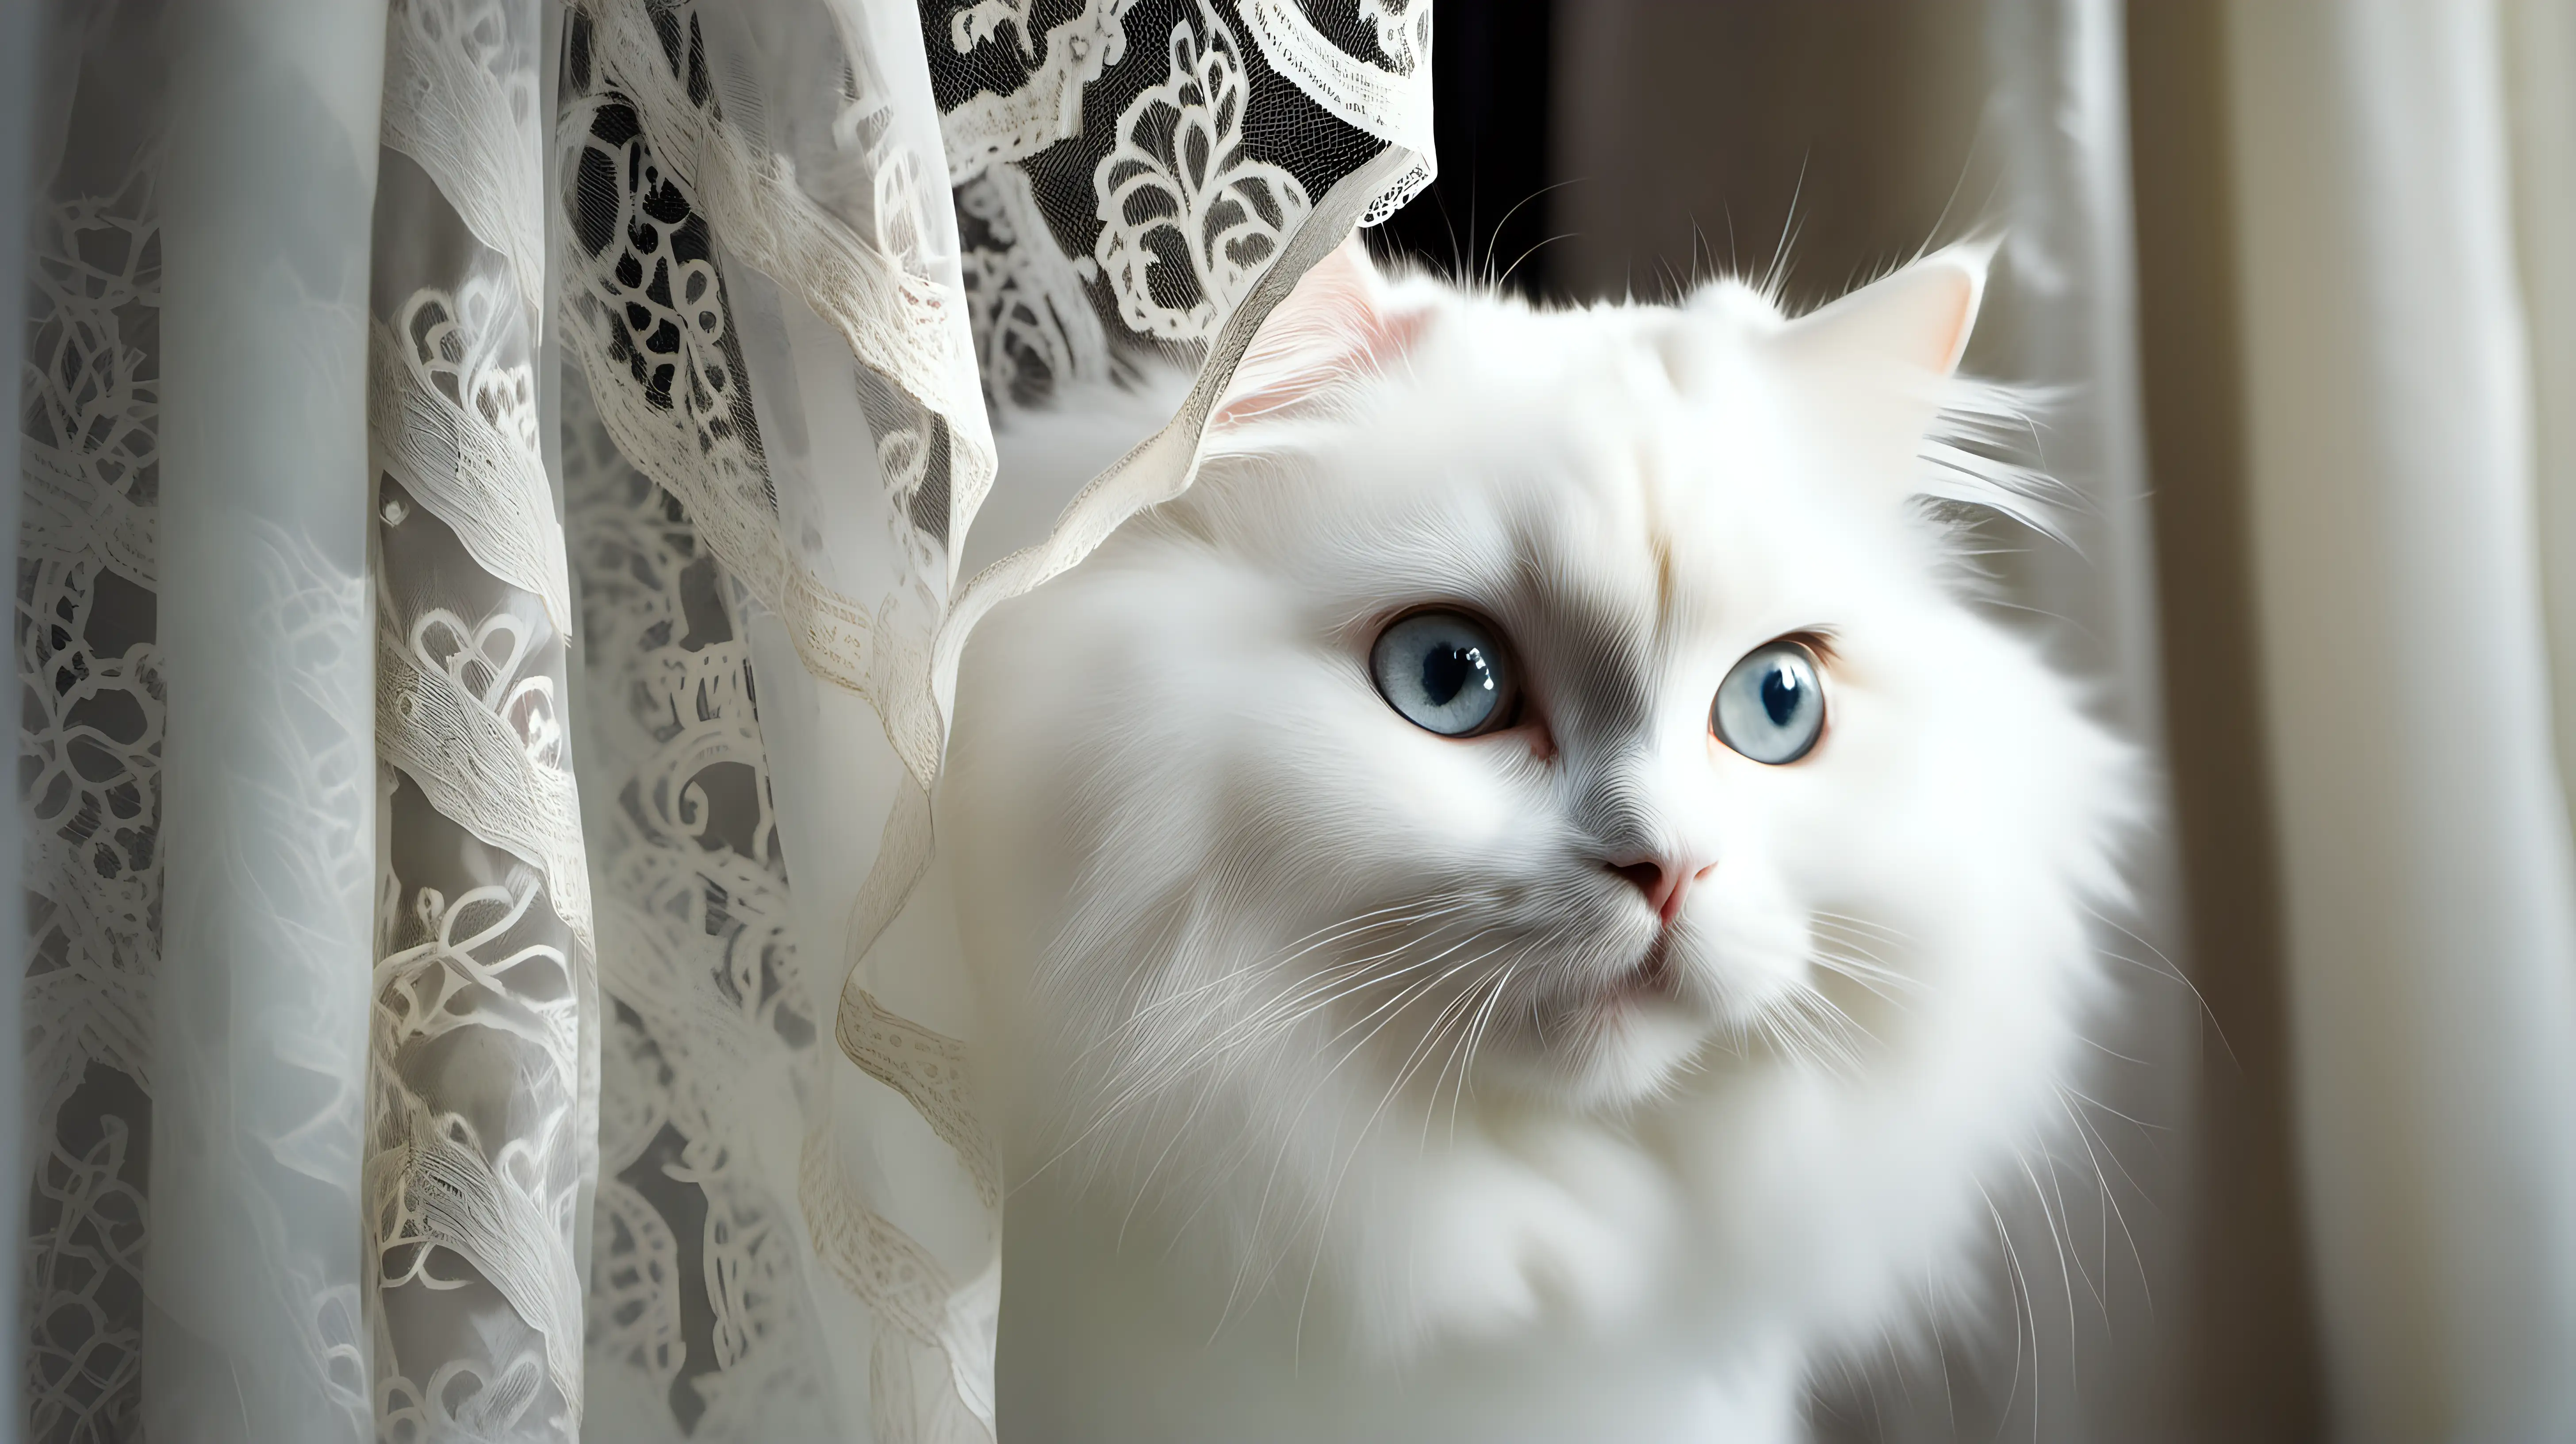 Innocent White Cat Peering from Lace Curtain